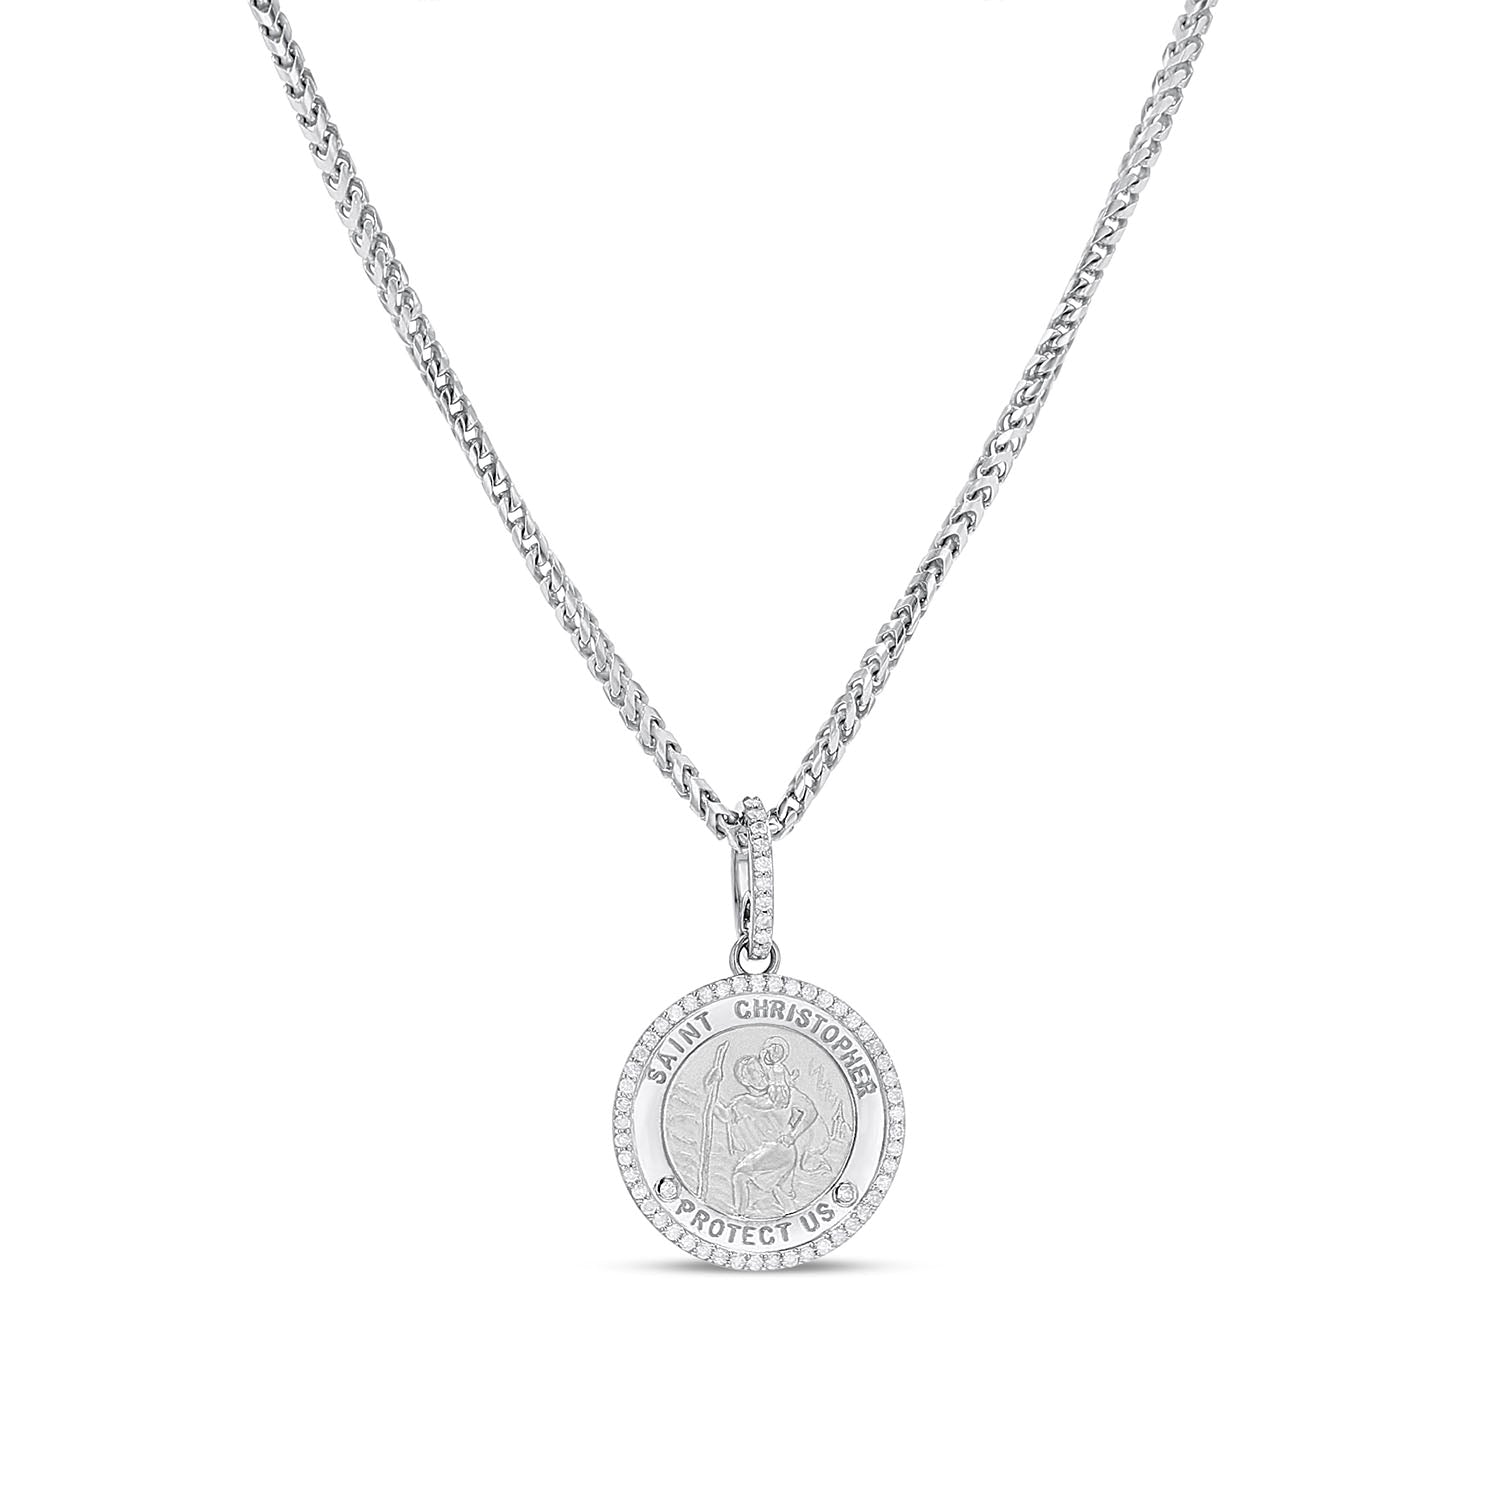 St. Christopher "Protect Us" with Diamond Halo Medallion - 25mm